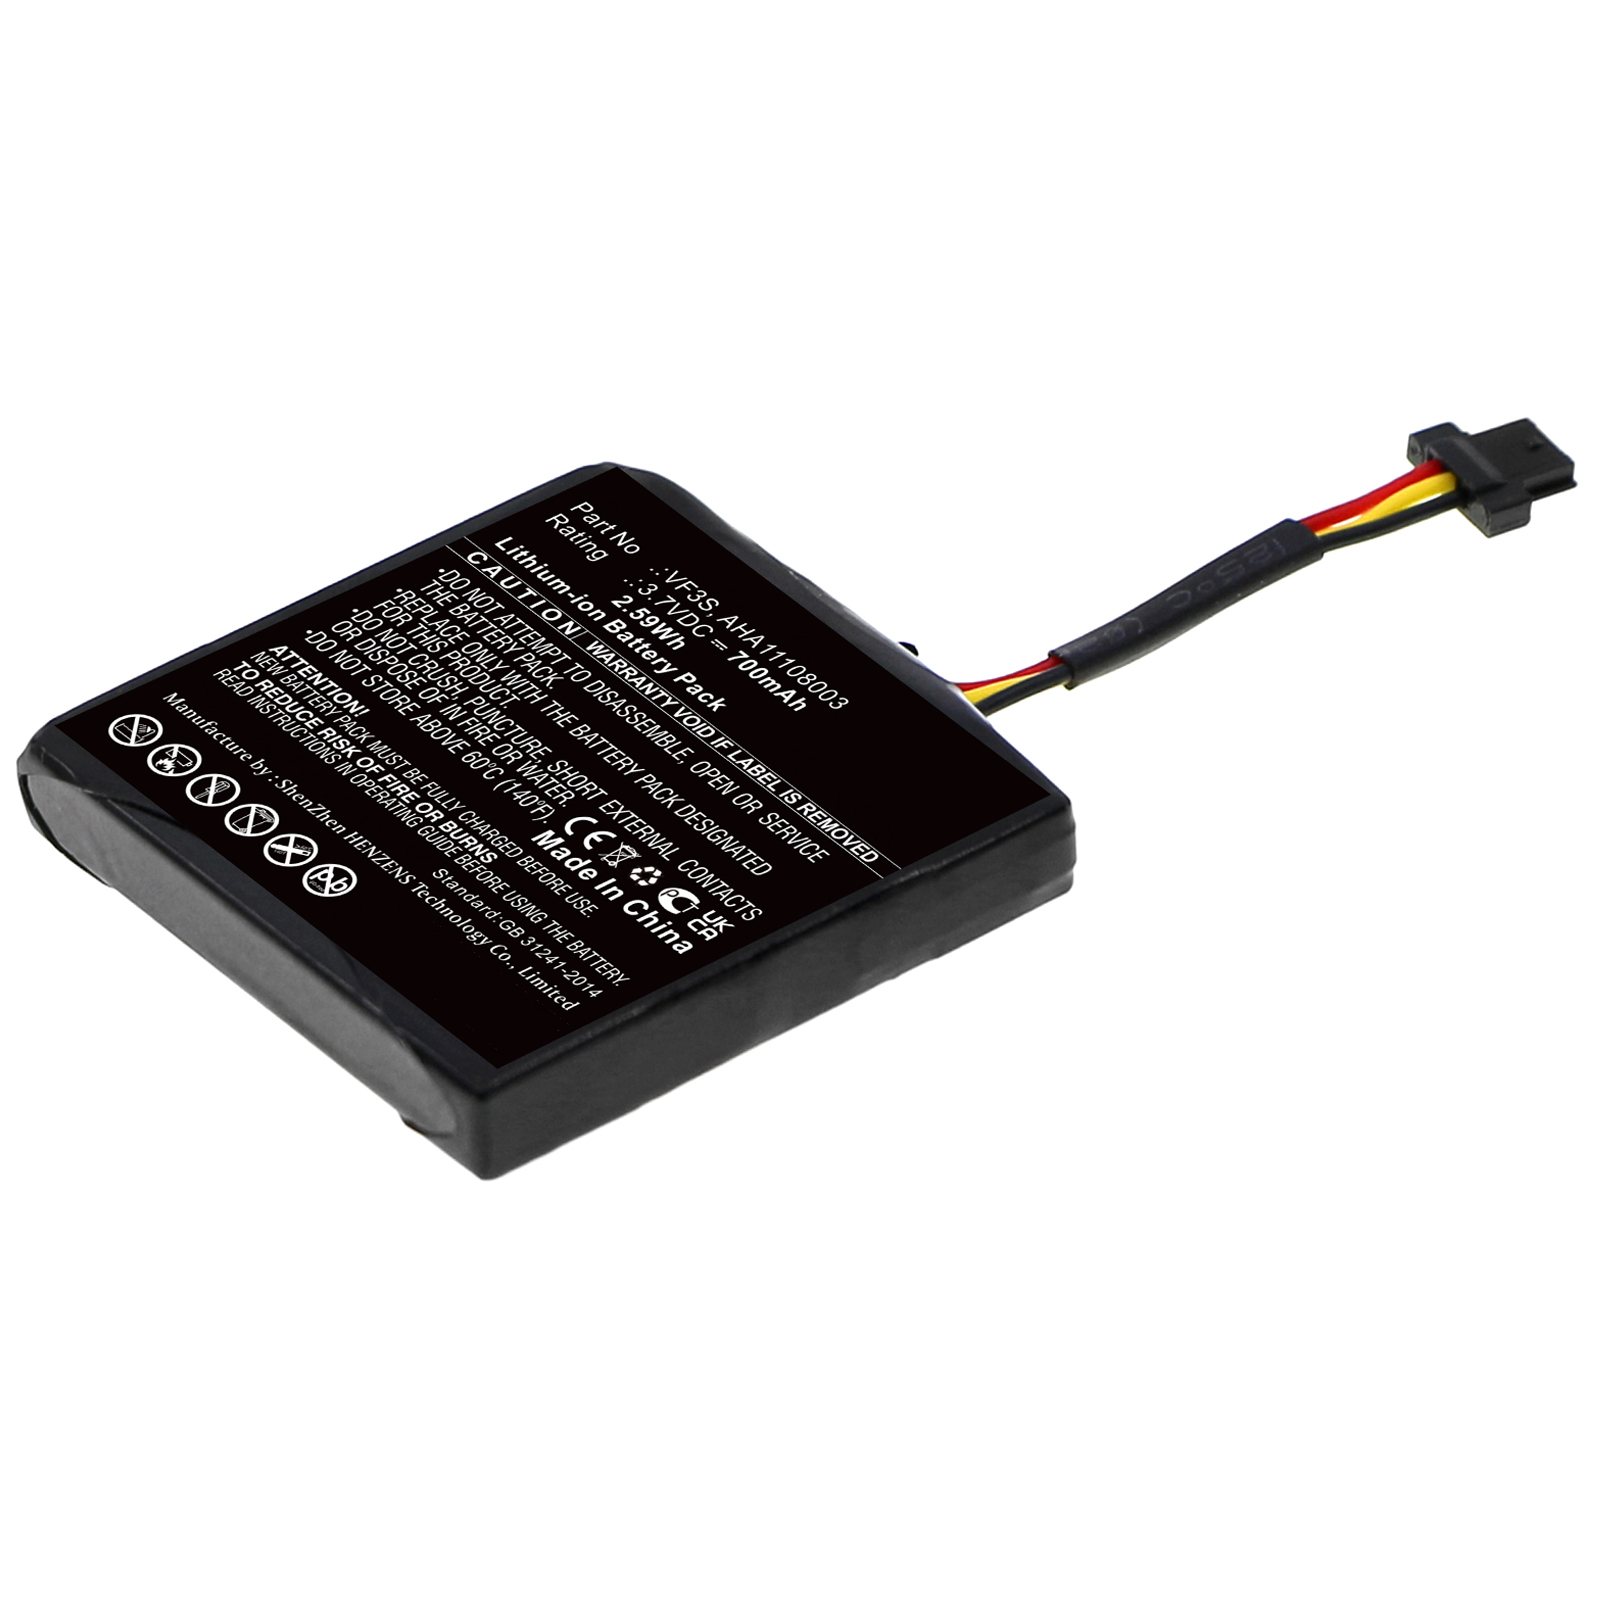 Synergy Digital GPS Battery, Compatible with TomTom VF3S GPS Battery (Li-ion, 3.7V, 700mAh)